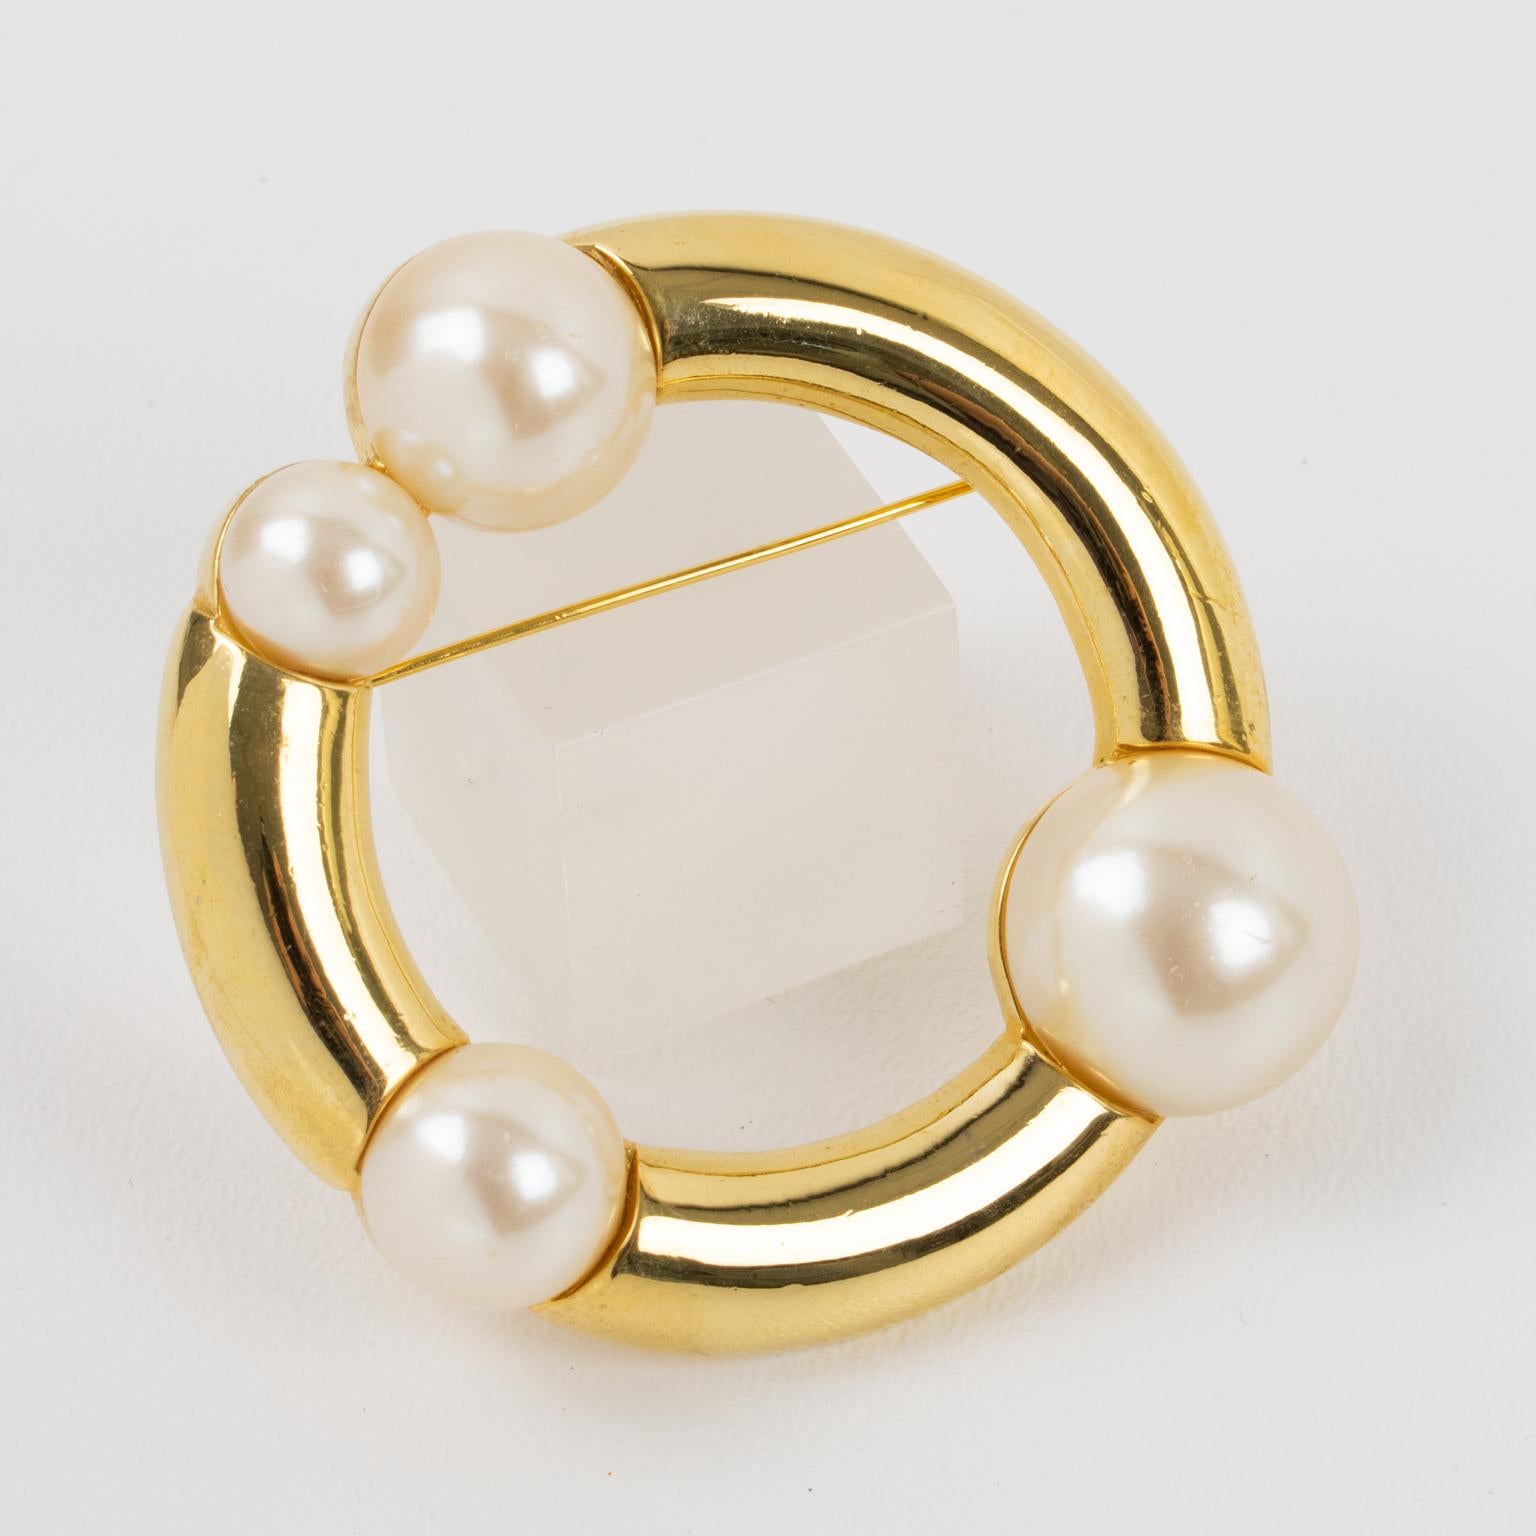 Women's Courreges Paris Gilt Metal and Pearl Modernist Pin Brooch